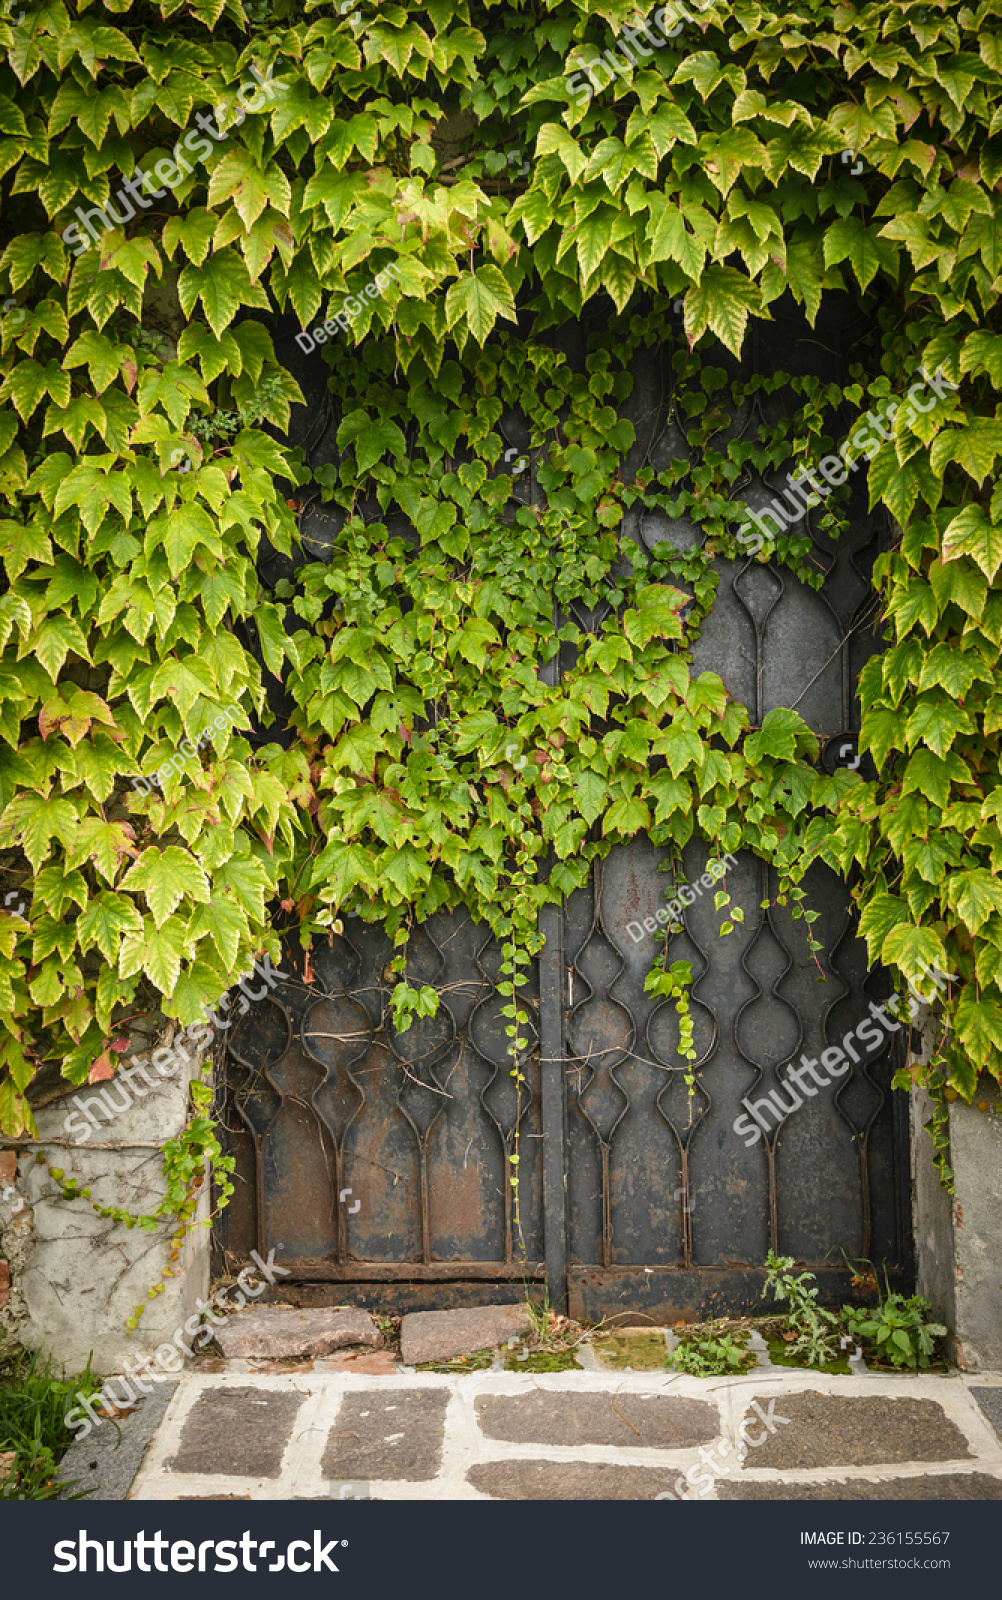 2,014 Ivy wood gate Images, Stock Photos & Vectors | Shutterstock